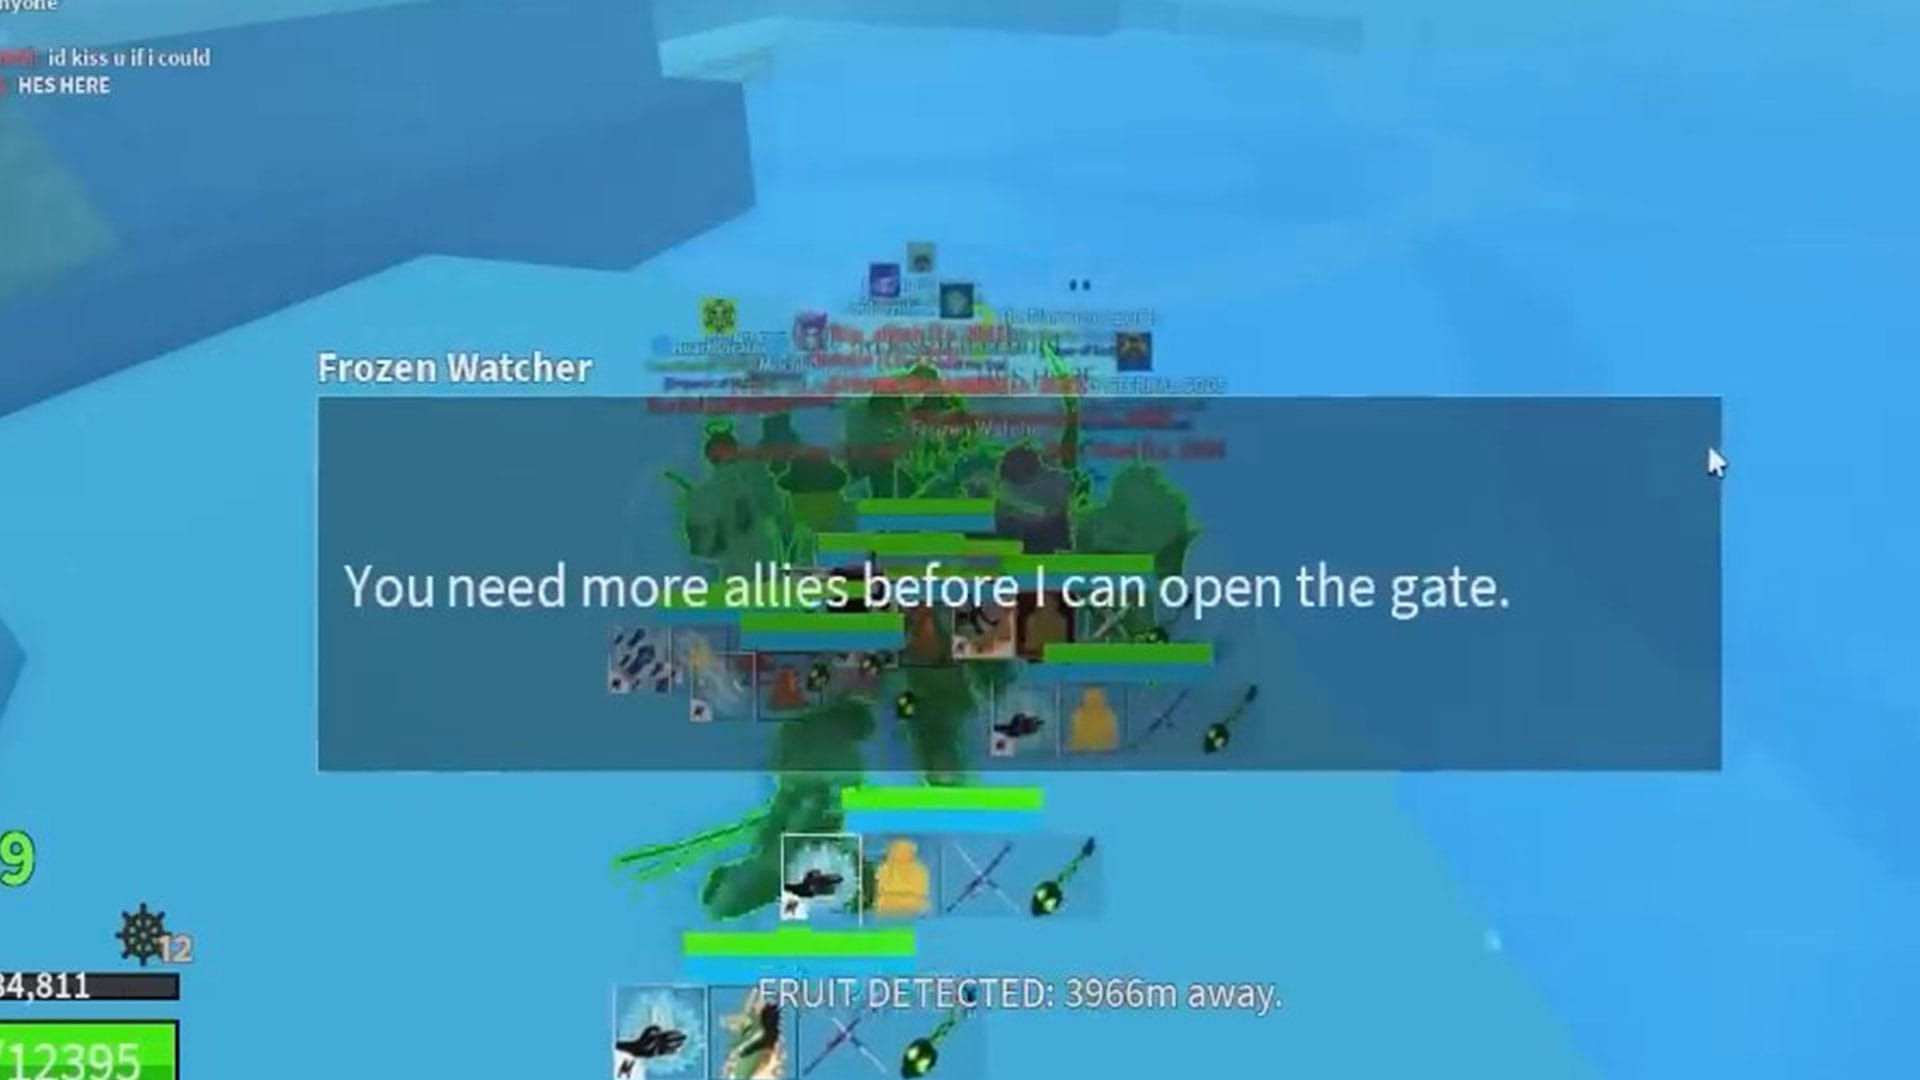 How To Spawn a Leviathan in Blox Fruits